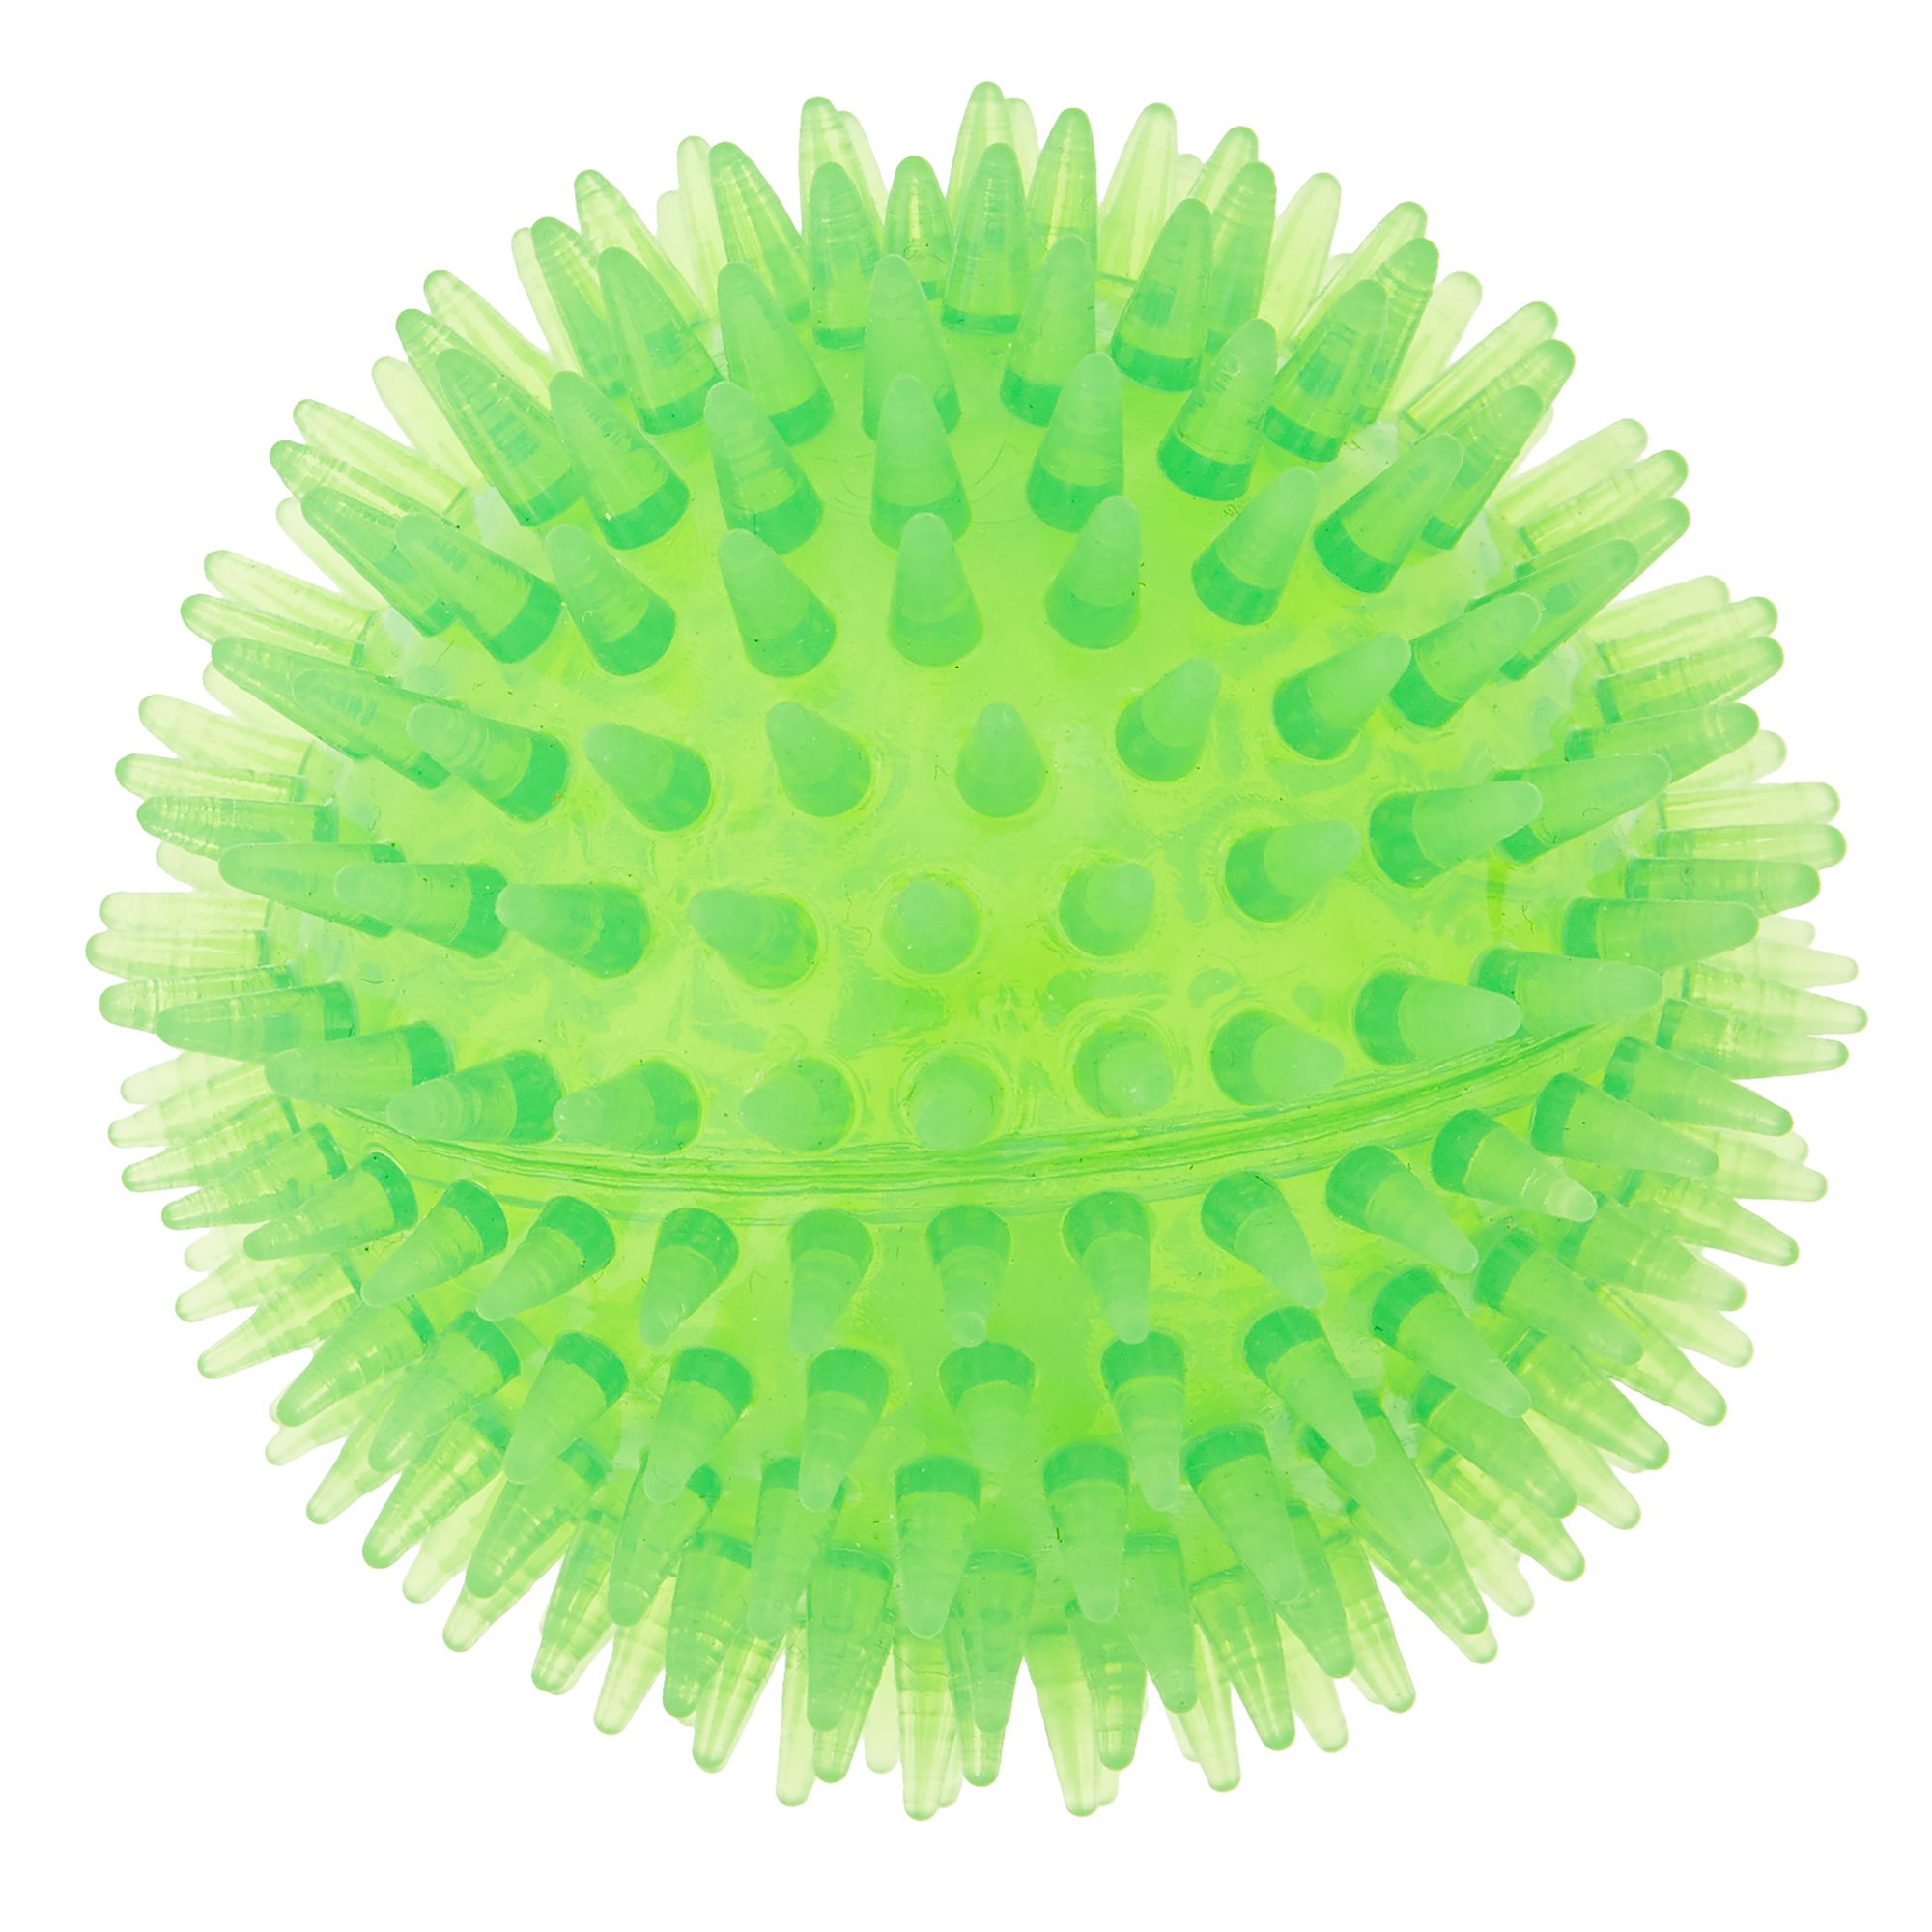 spike ball for dogs